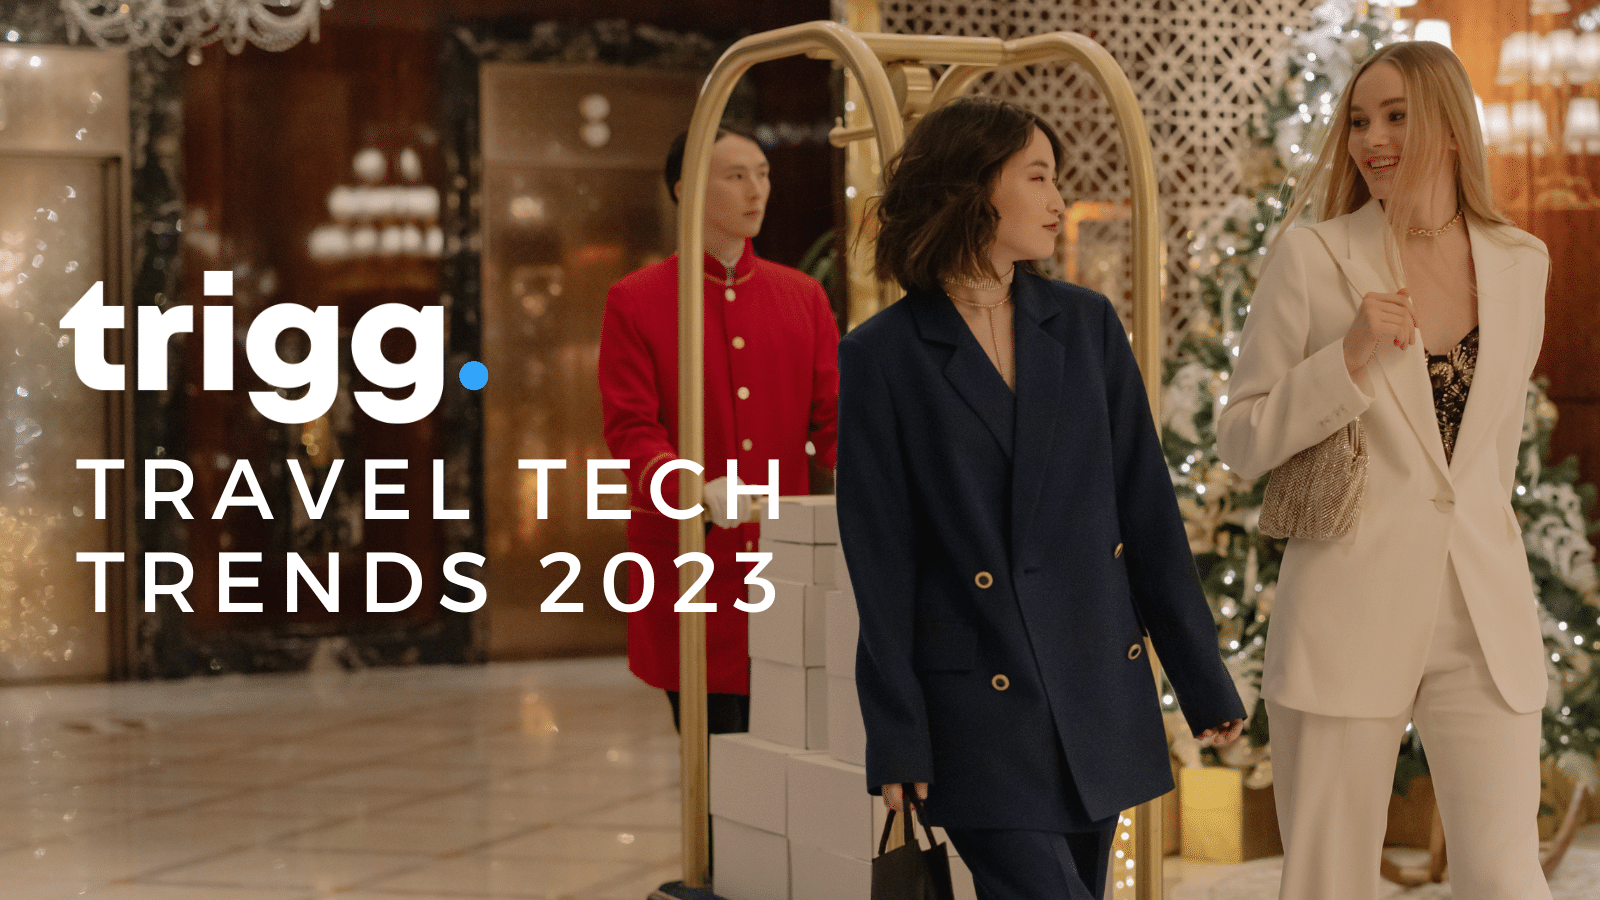 two women in a hotel lobby with overlaid text 'Travel Tech Trends 2023'